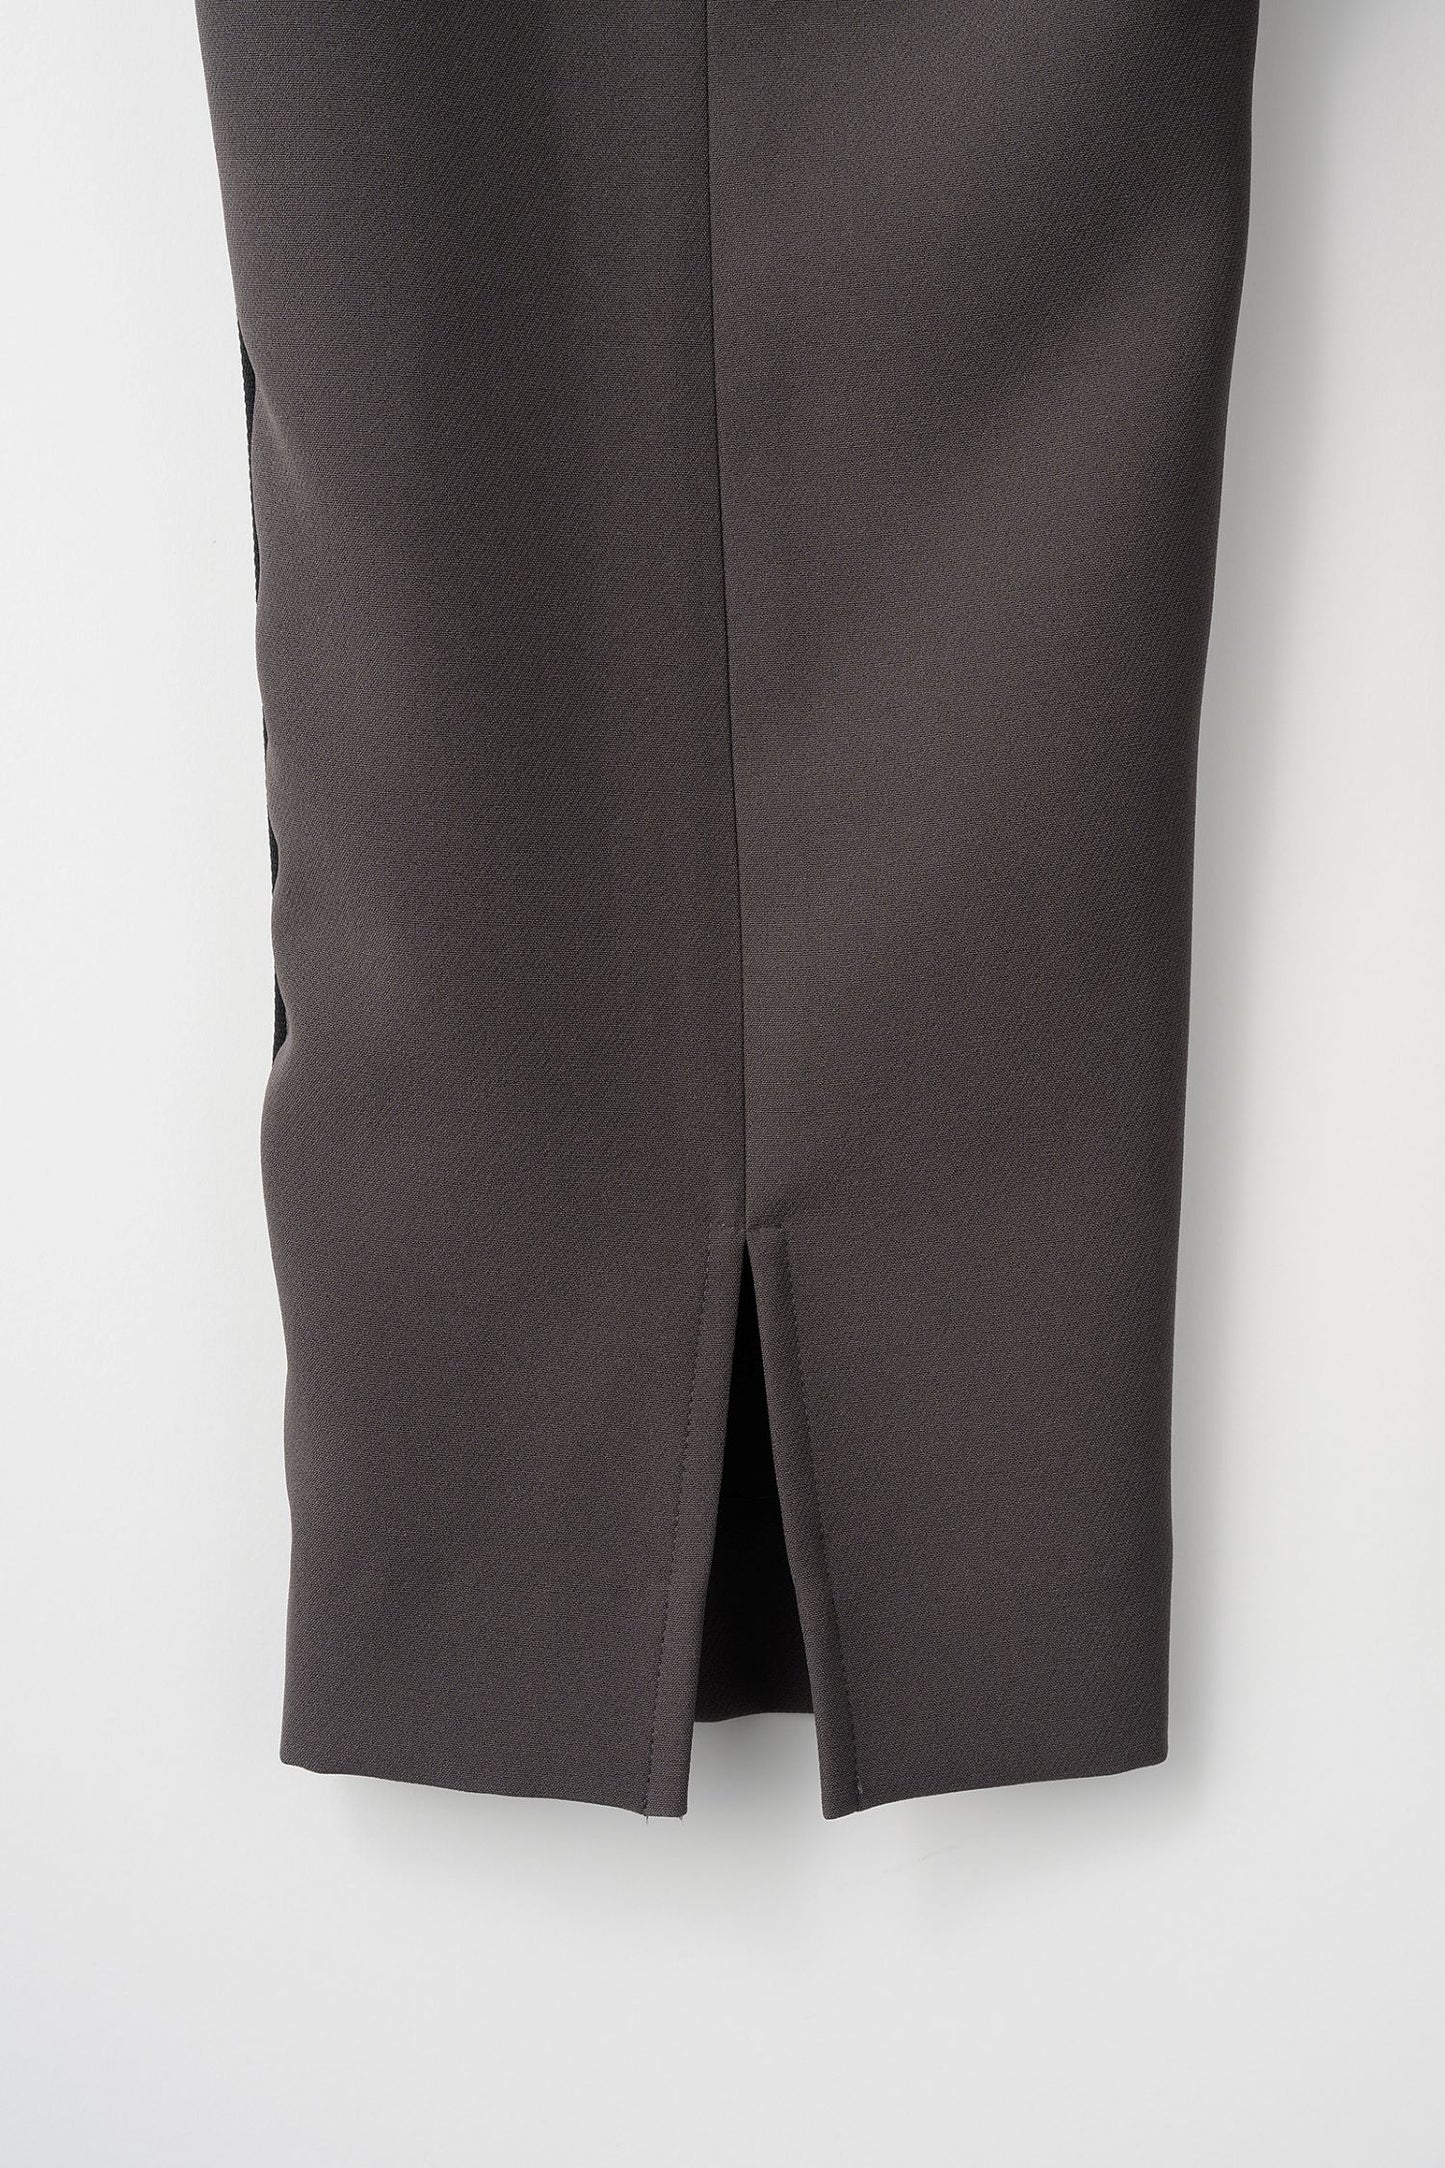 Stretch caster pants (Charcoal)